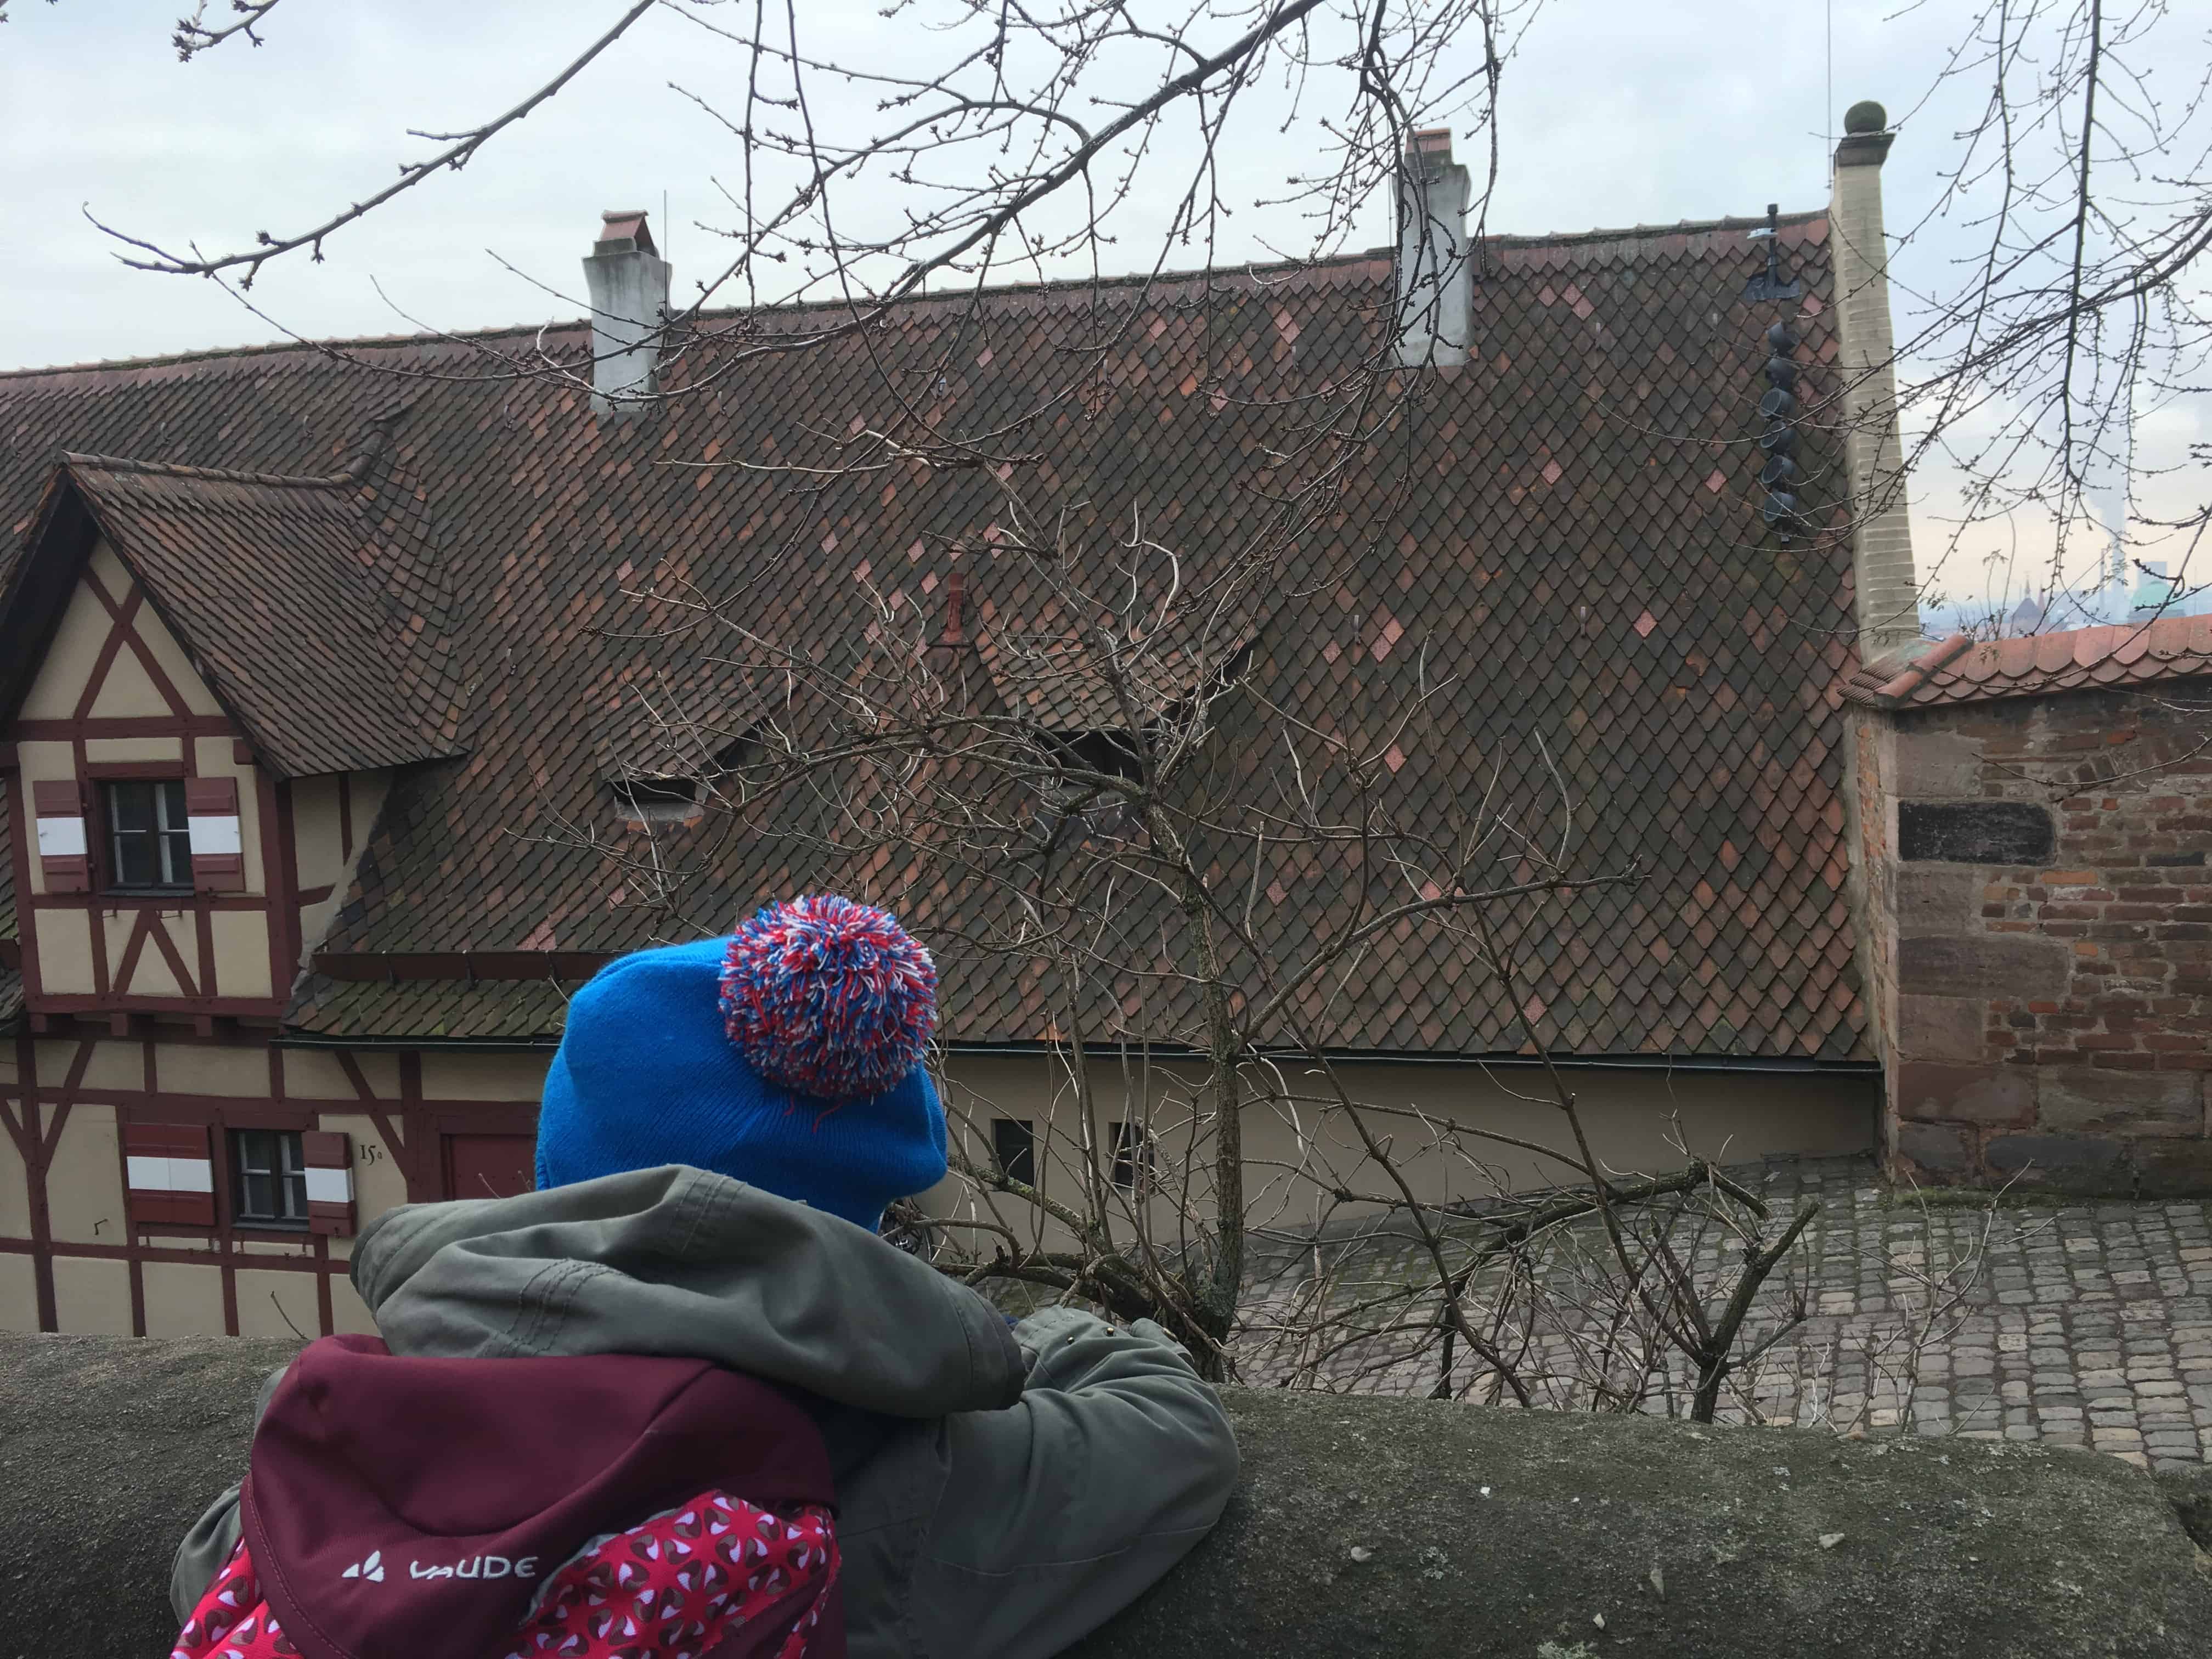 Helping you find the right mix of hotel, things to do, places to see and restaurants to visit while exploring Nuremberg Germany With kids